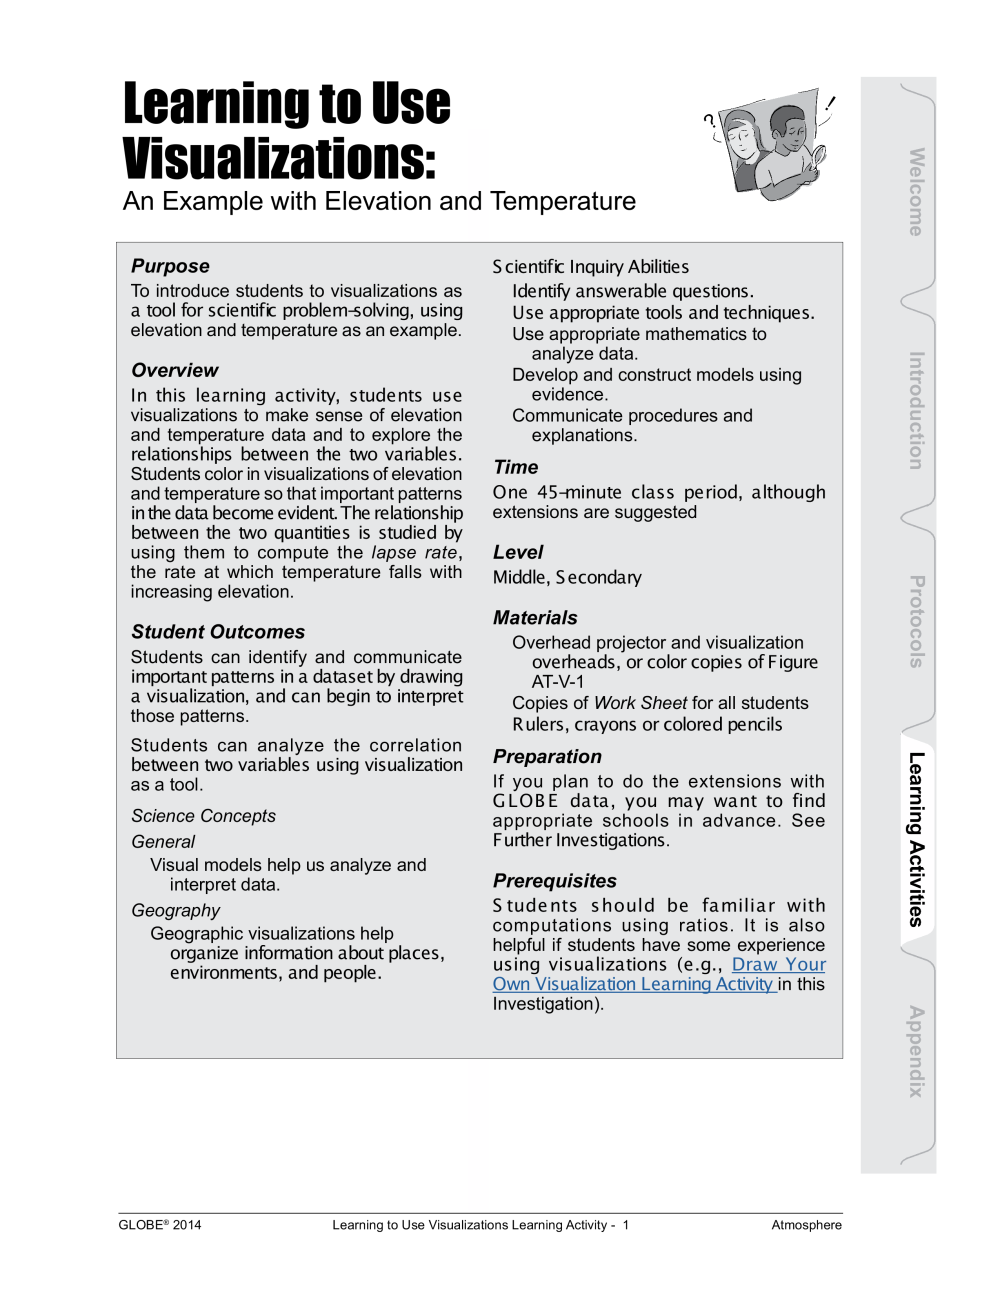 Learning Activities preview for Learning to Use Visualizations - An Example with Elevation and Temperature